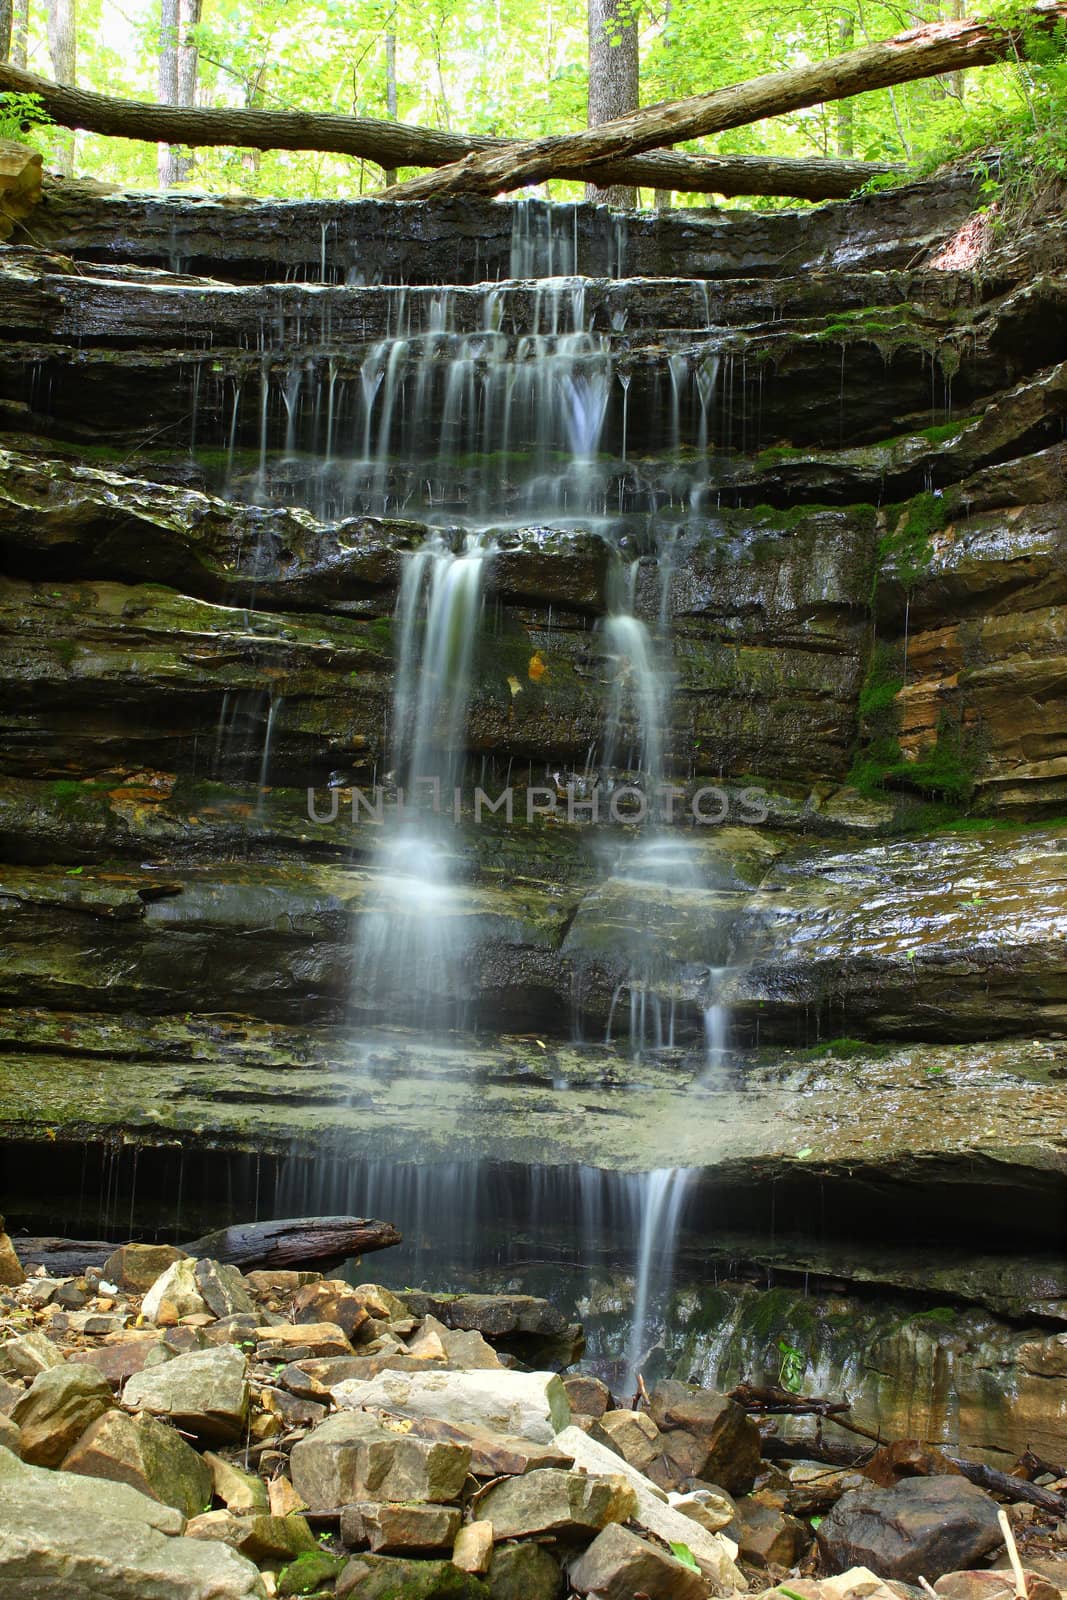 Tranquil waterfall at Monte Sano State Park in northern Alabama.